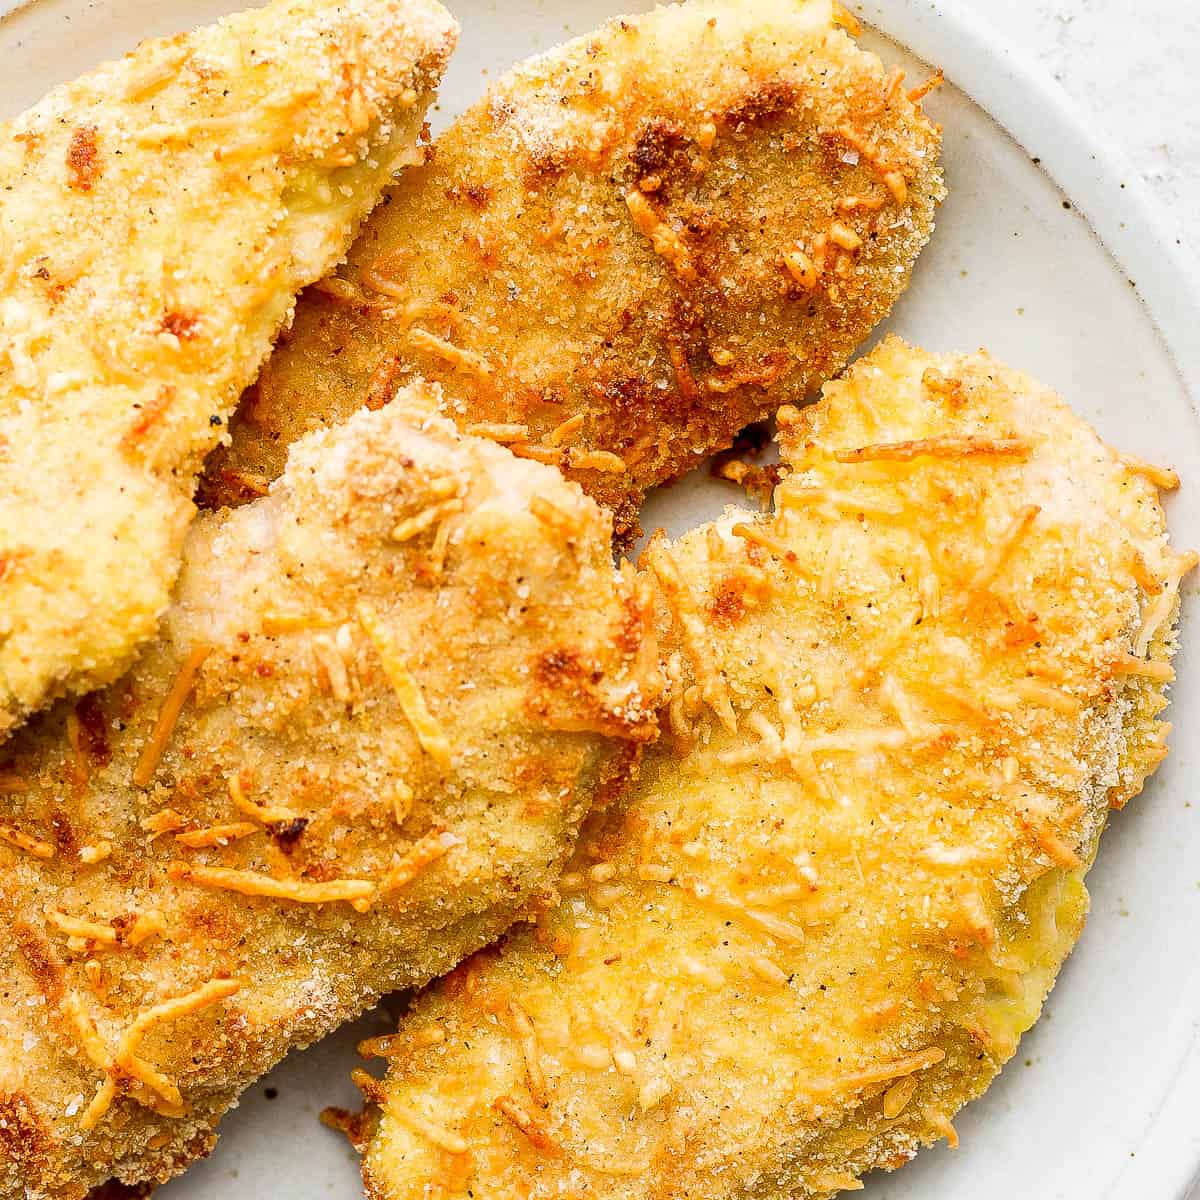 Chicken Cutlets vs. Chicken Breast: How They're Different, Recipes, and More